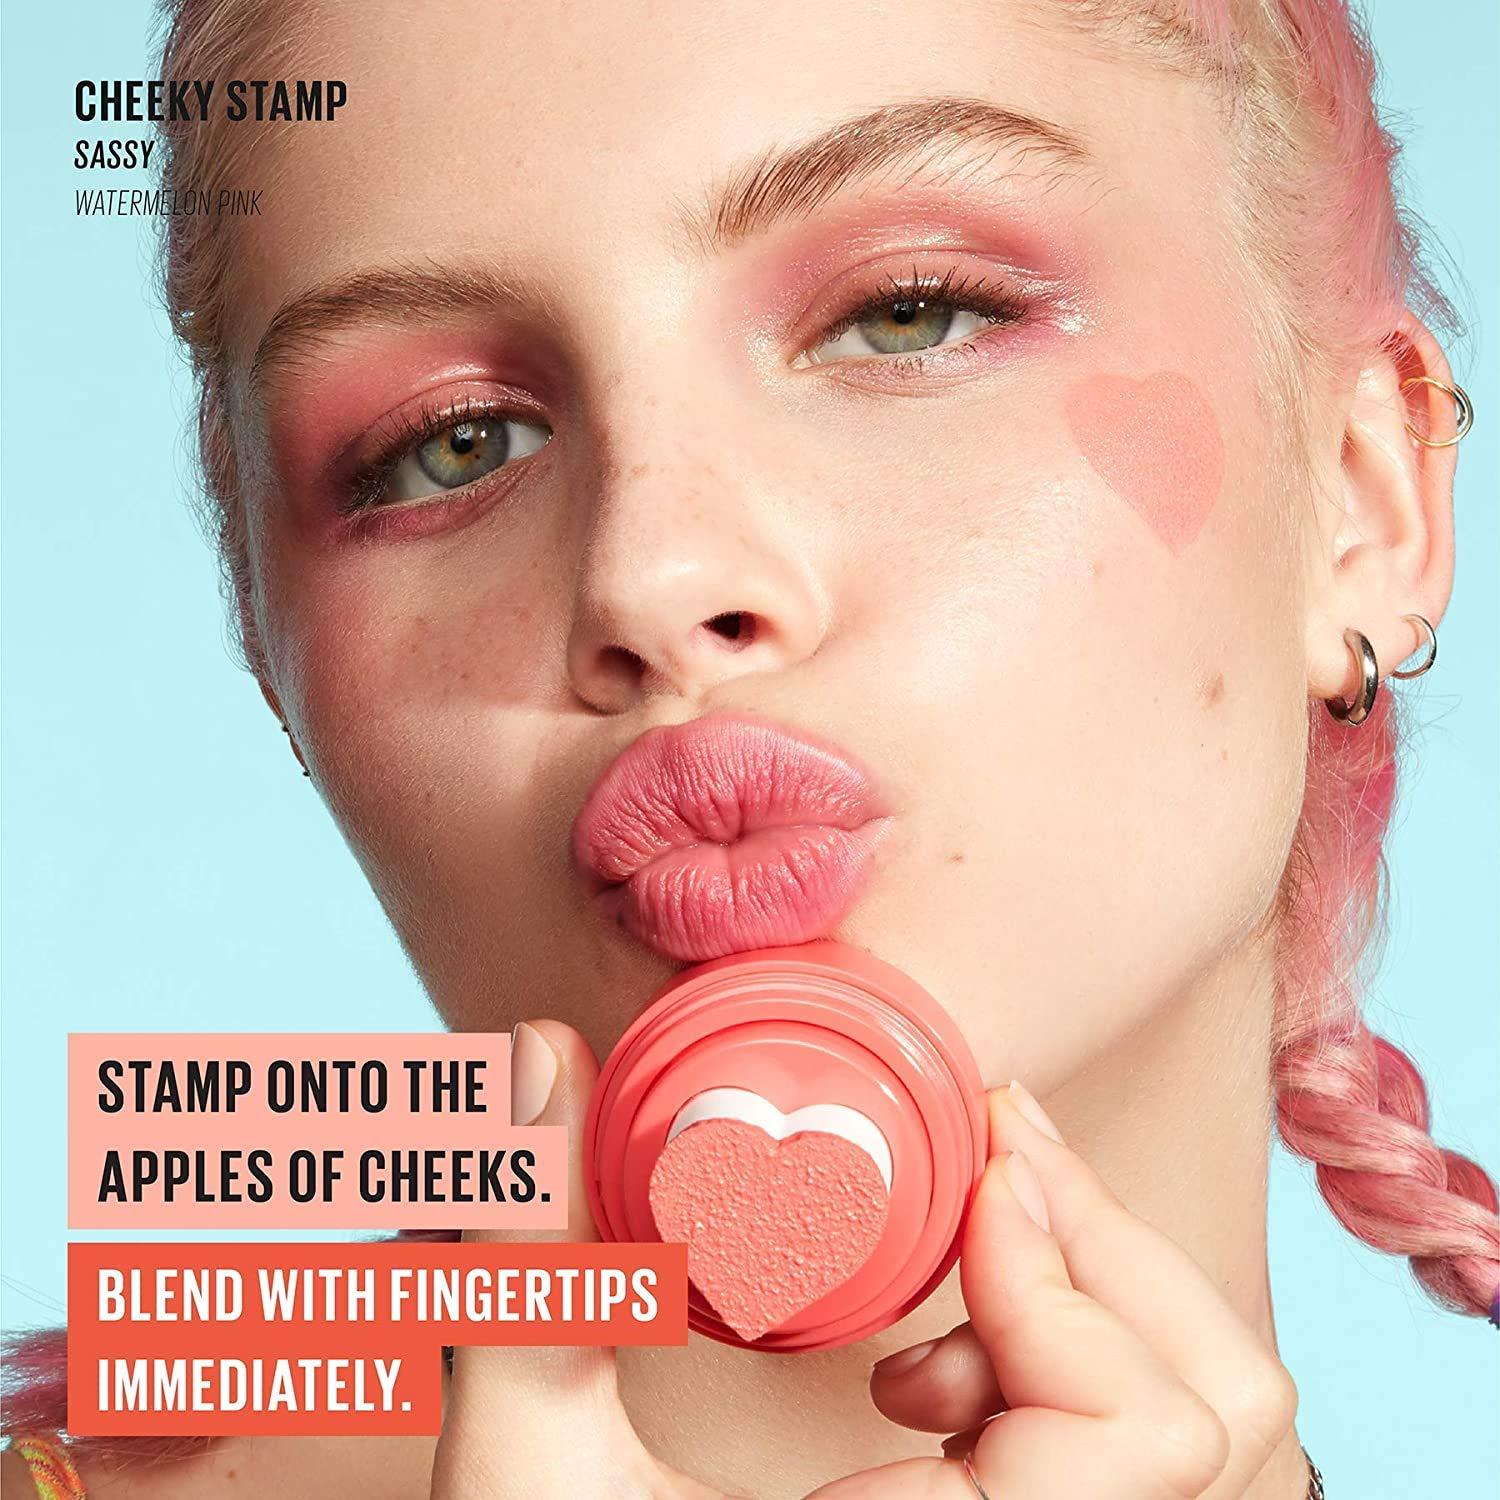 Kaja Blush - Cheeky Stamp  Gift 7 Shades Buildable & Blendable Shade with  Heart-shaped Applicator Rosy Finish 01 Coy 0.17 Oz